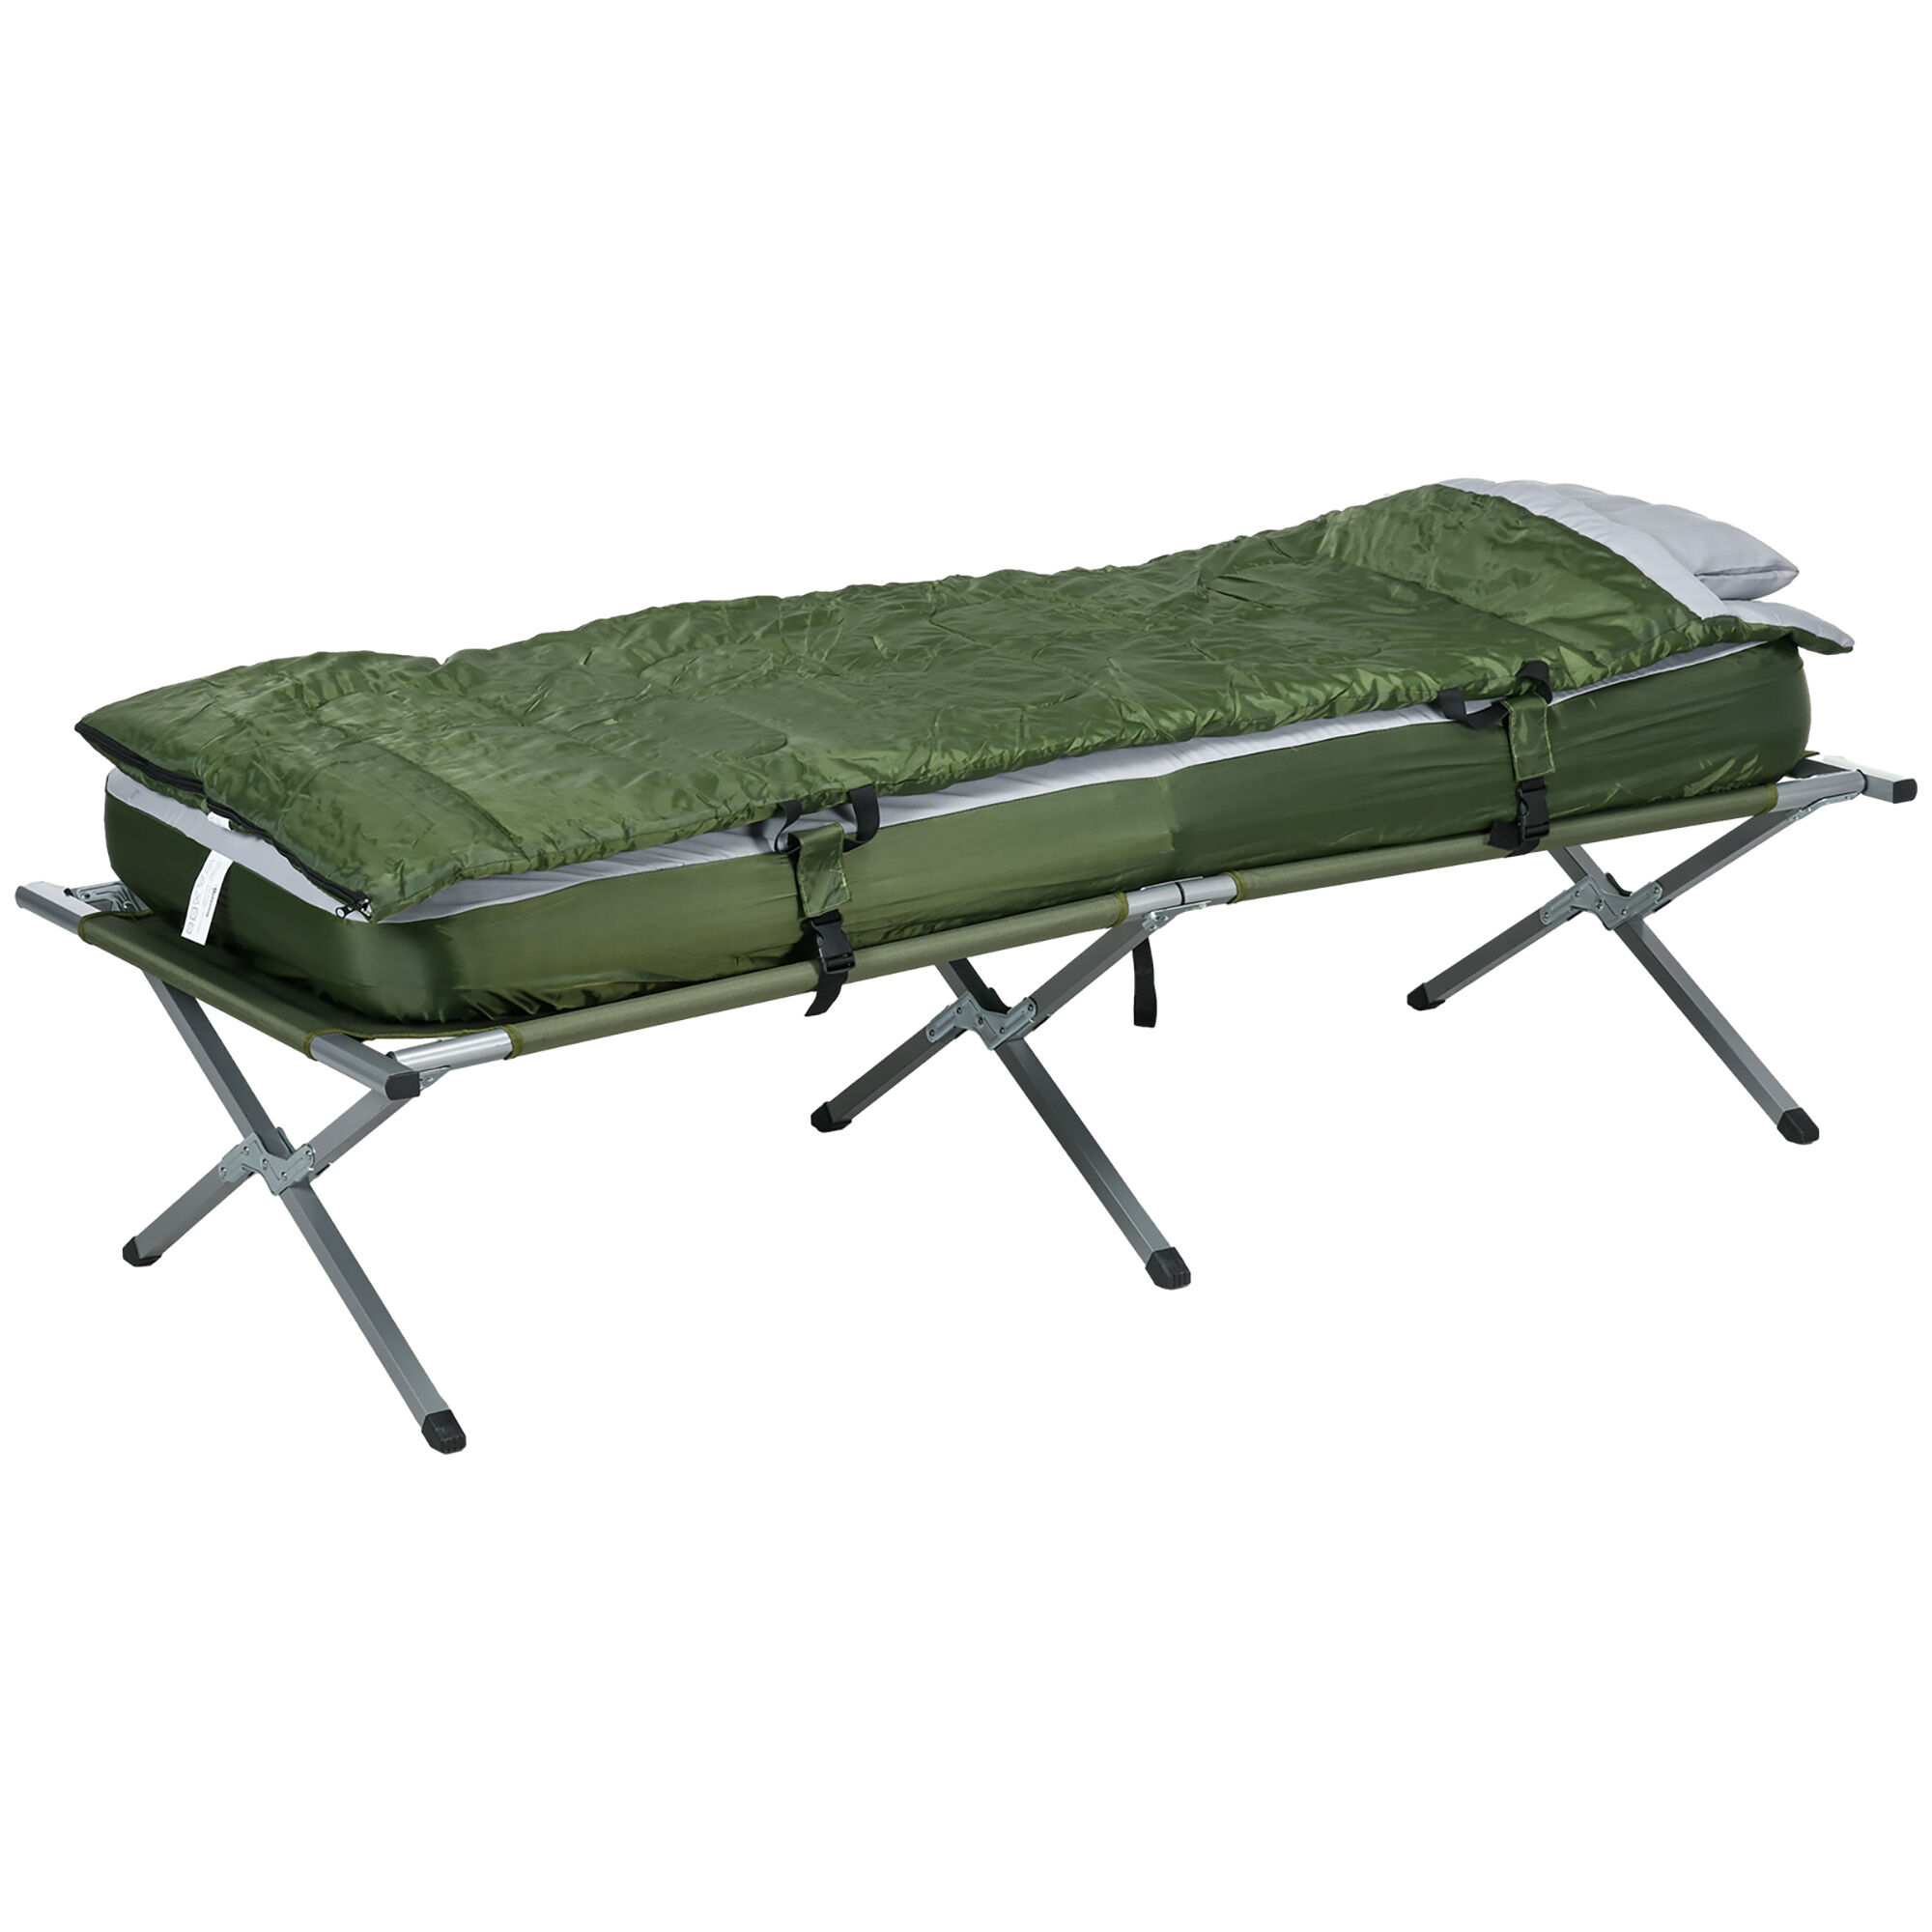 Outsunny Folding Camping Cot with Mattress, Sleeping Bag, Pillow and Carry Bag, Comfortable and Portable, for Travel Camp Beach